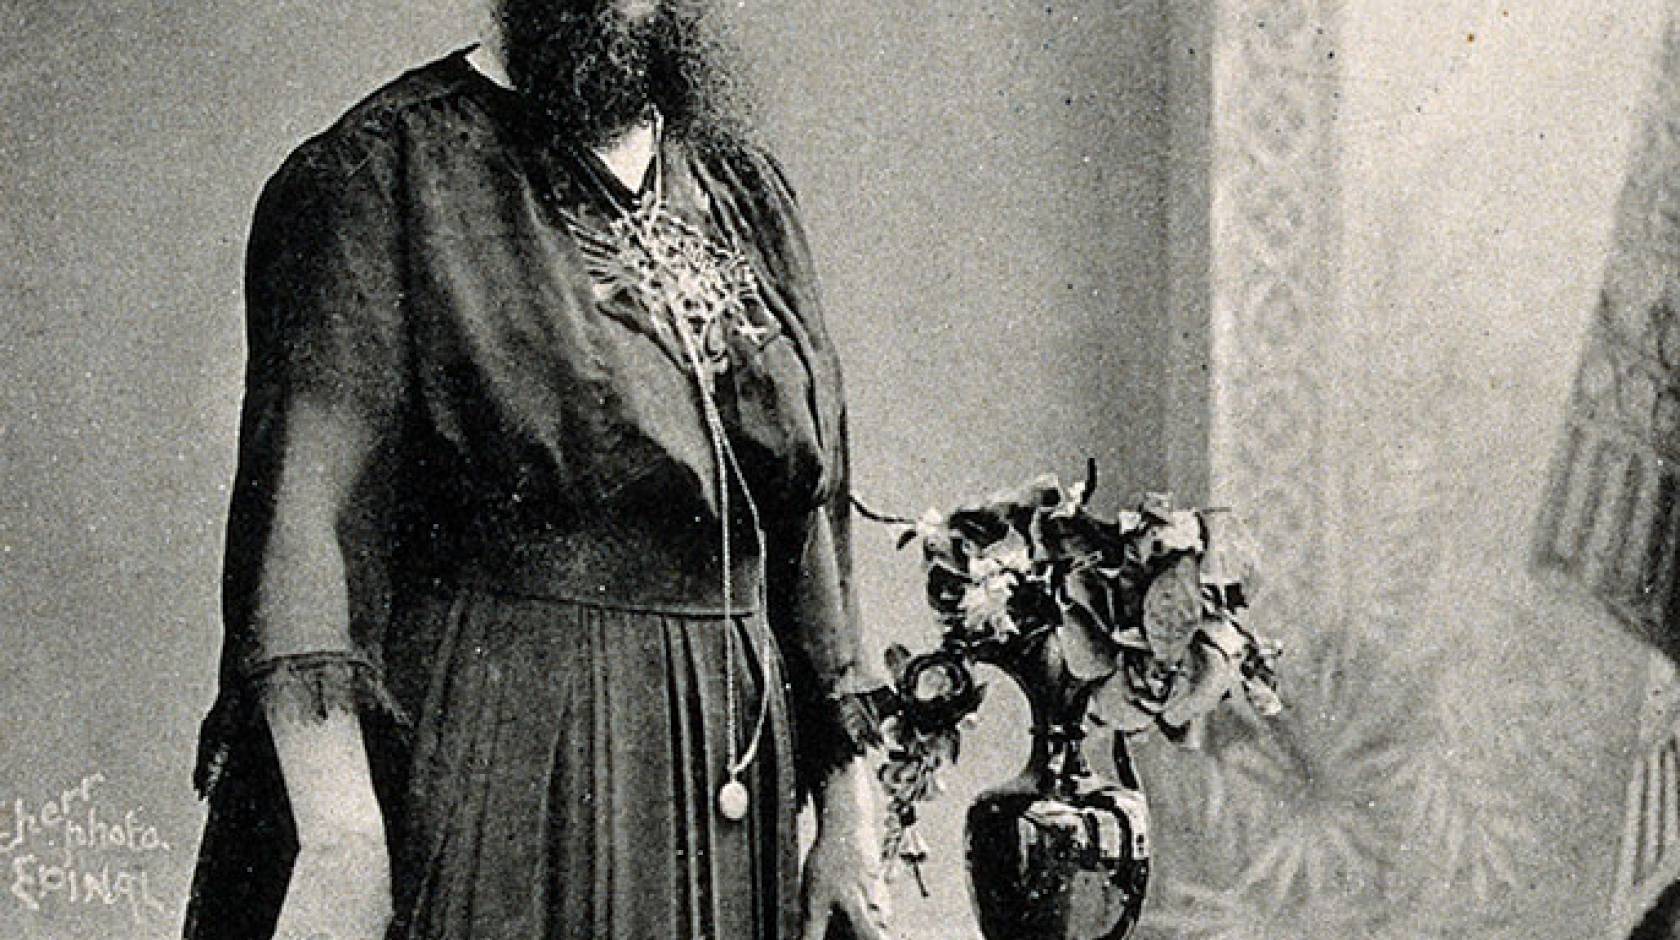 Mme Delait, bearded lady of Plombieres